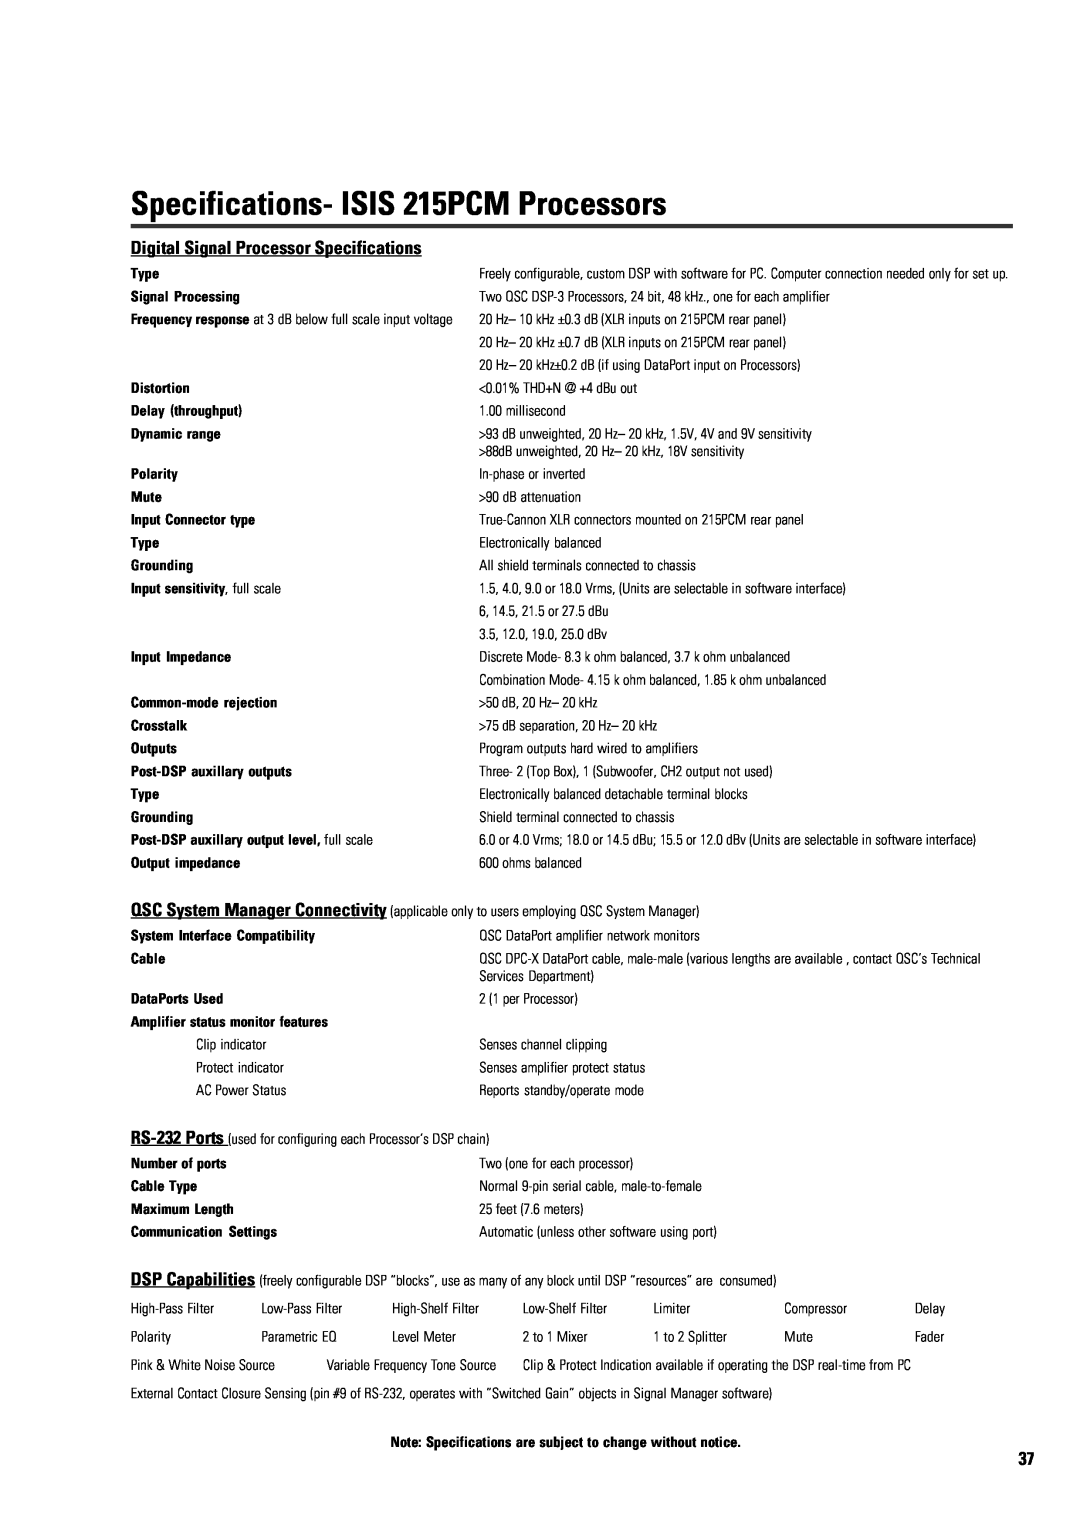 QSC Audio user manual Specifications- ISIS 215PCM Processors, Digital Signal Processor Specifications 